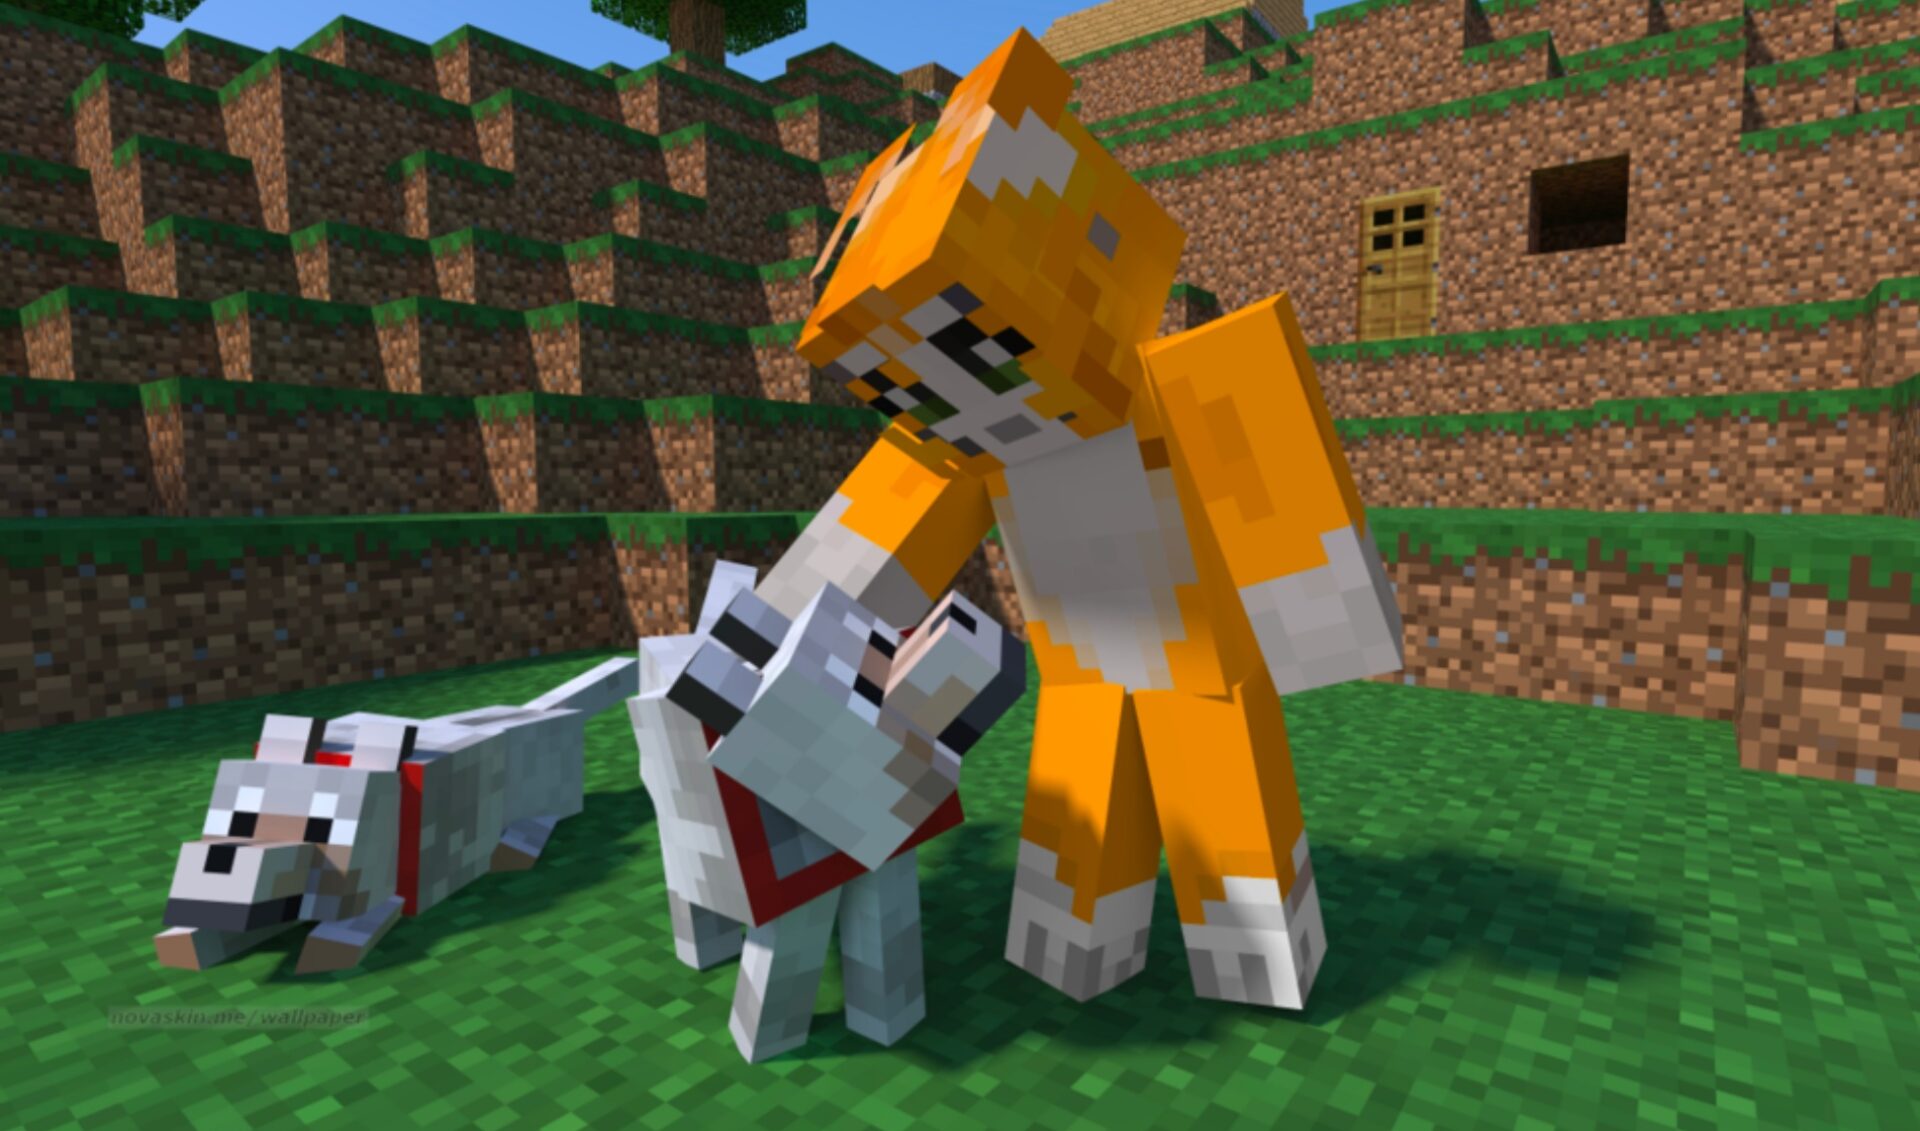 After 823 ‘Minecraft’ adventures, Stampy Cat creator ends “fantastic ride” on YouTube